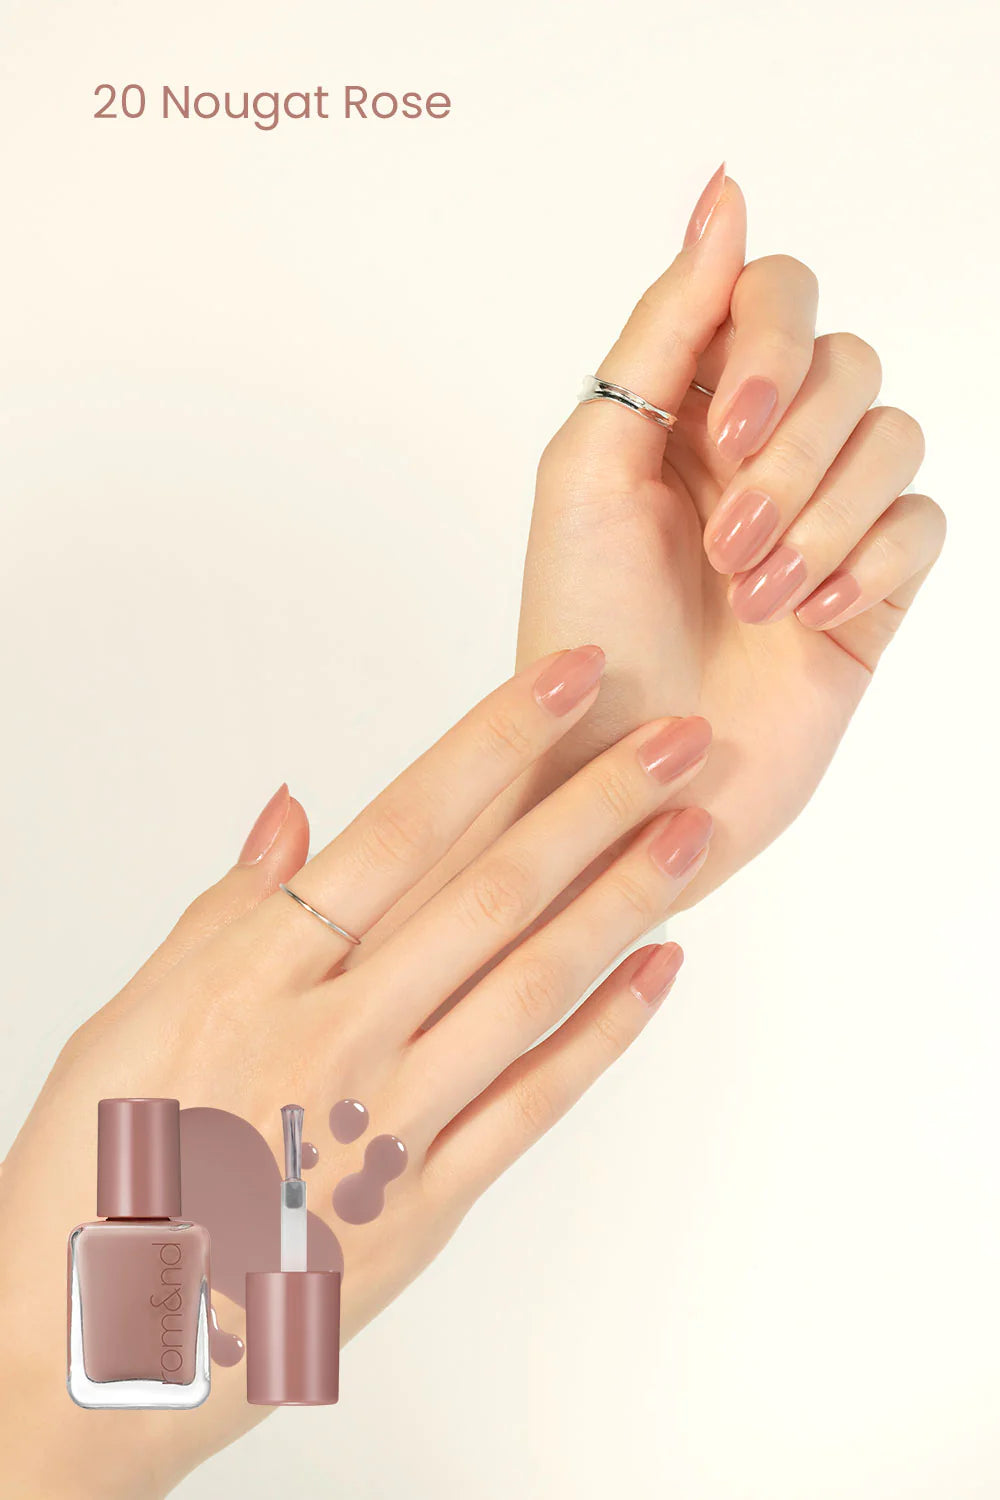 Rom&nd Mood Pebble Nail Muteral Nude Collection-4 Colors